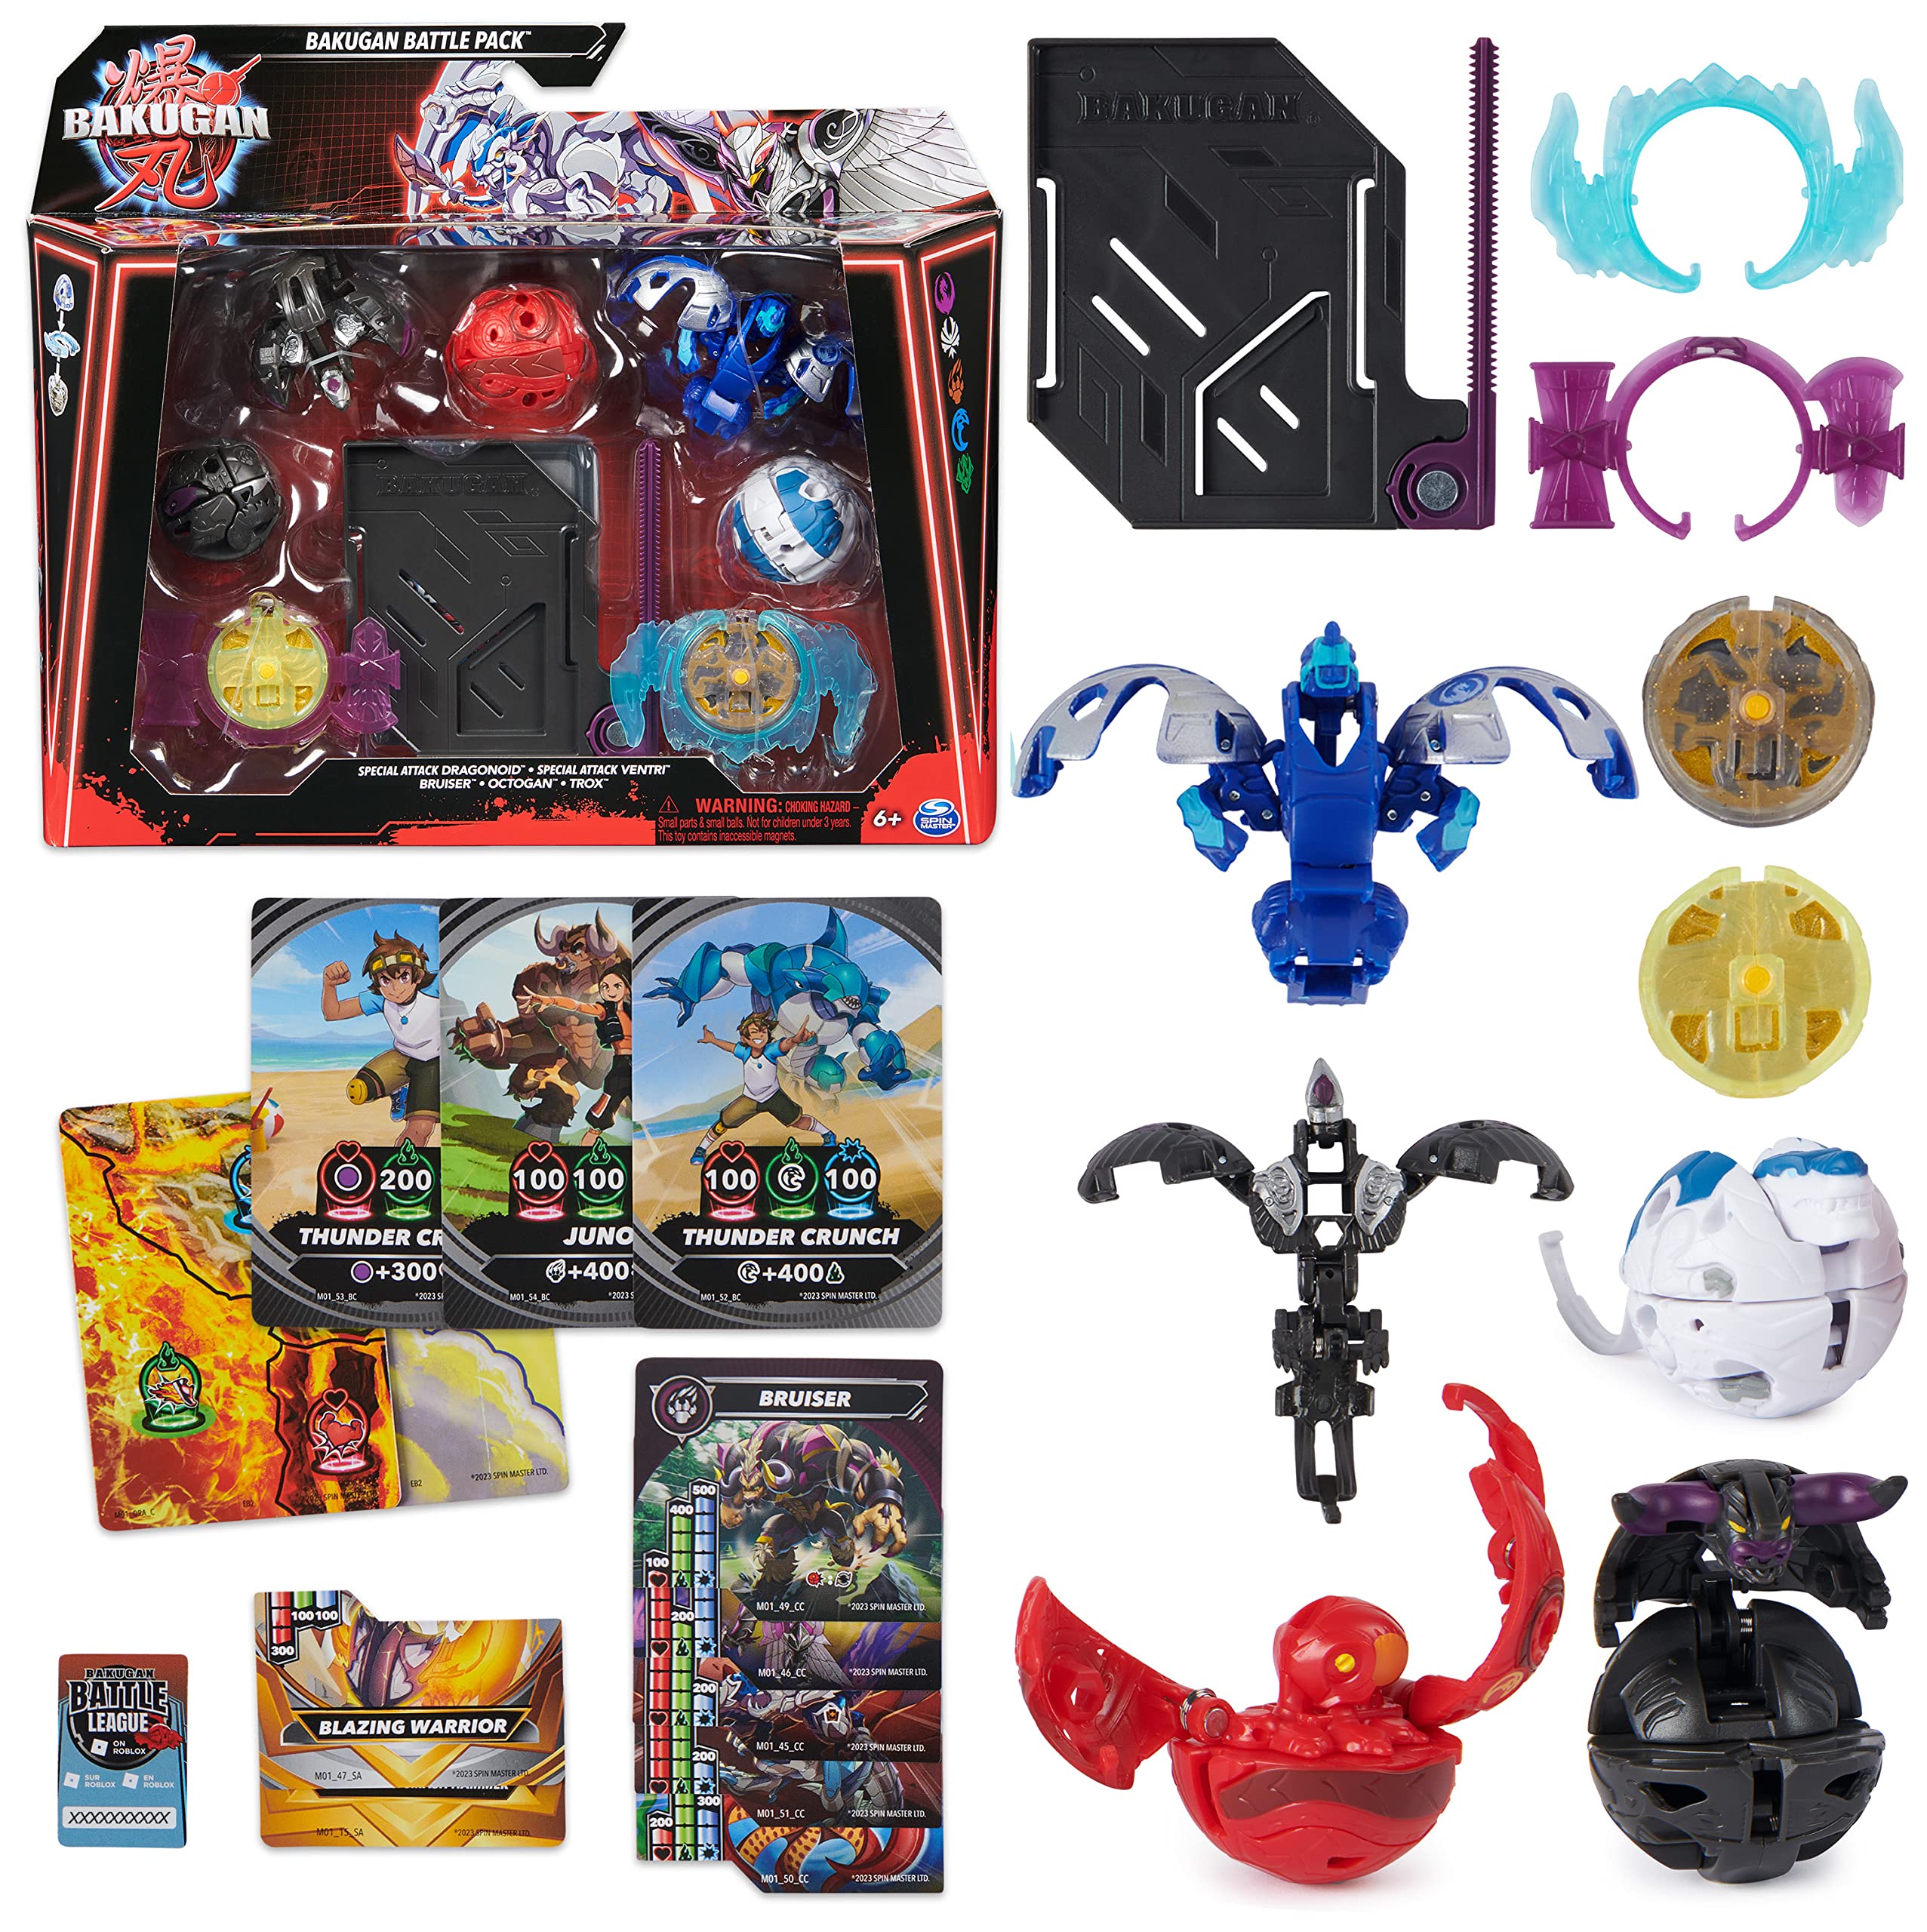 Bakugan Battle 5-Pack, Special Attack Dragonoid, Ventri, Bruiser, Octogan, Trox; Customizable, Spinning Action Figures, Kids Toys for Boys and Girls 6 and up